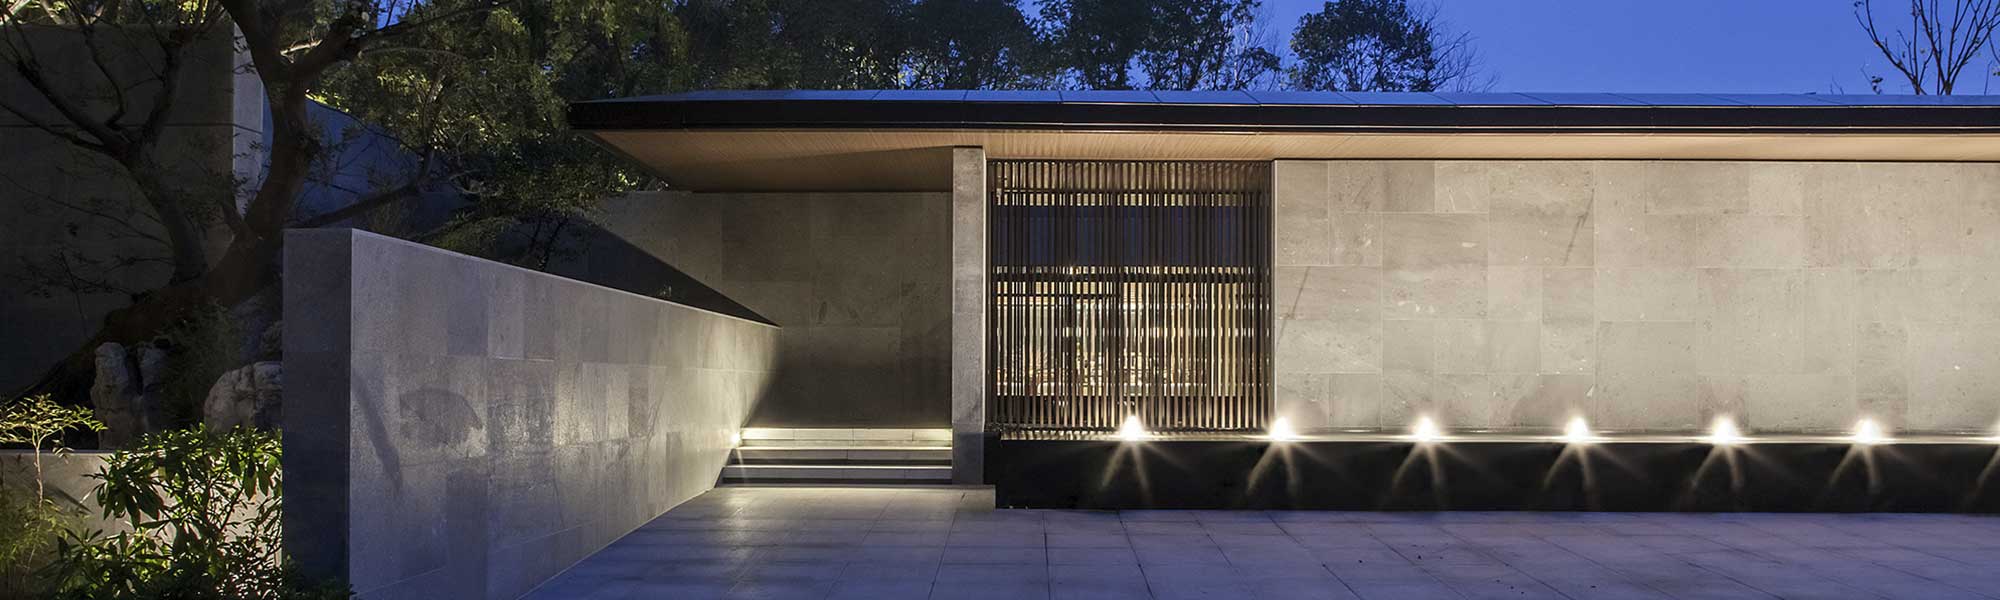 Tao Hua Yuan Tea House by CL3 Architects Limited